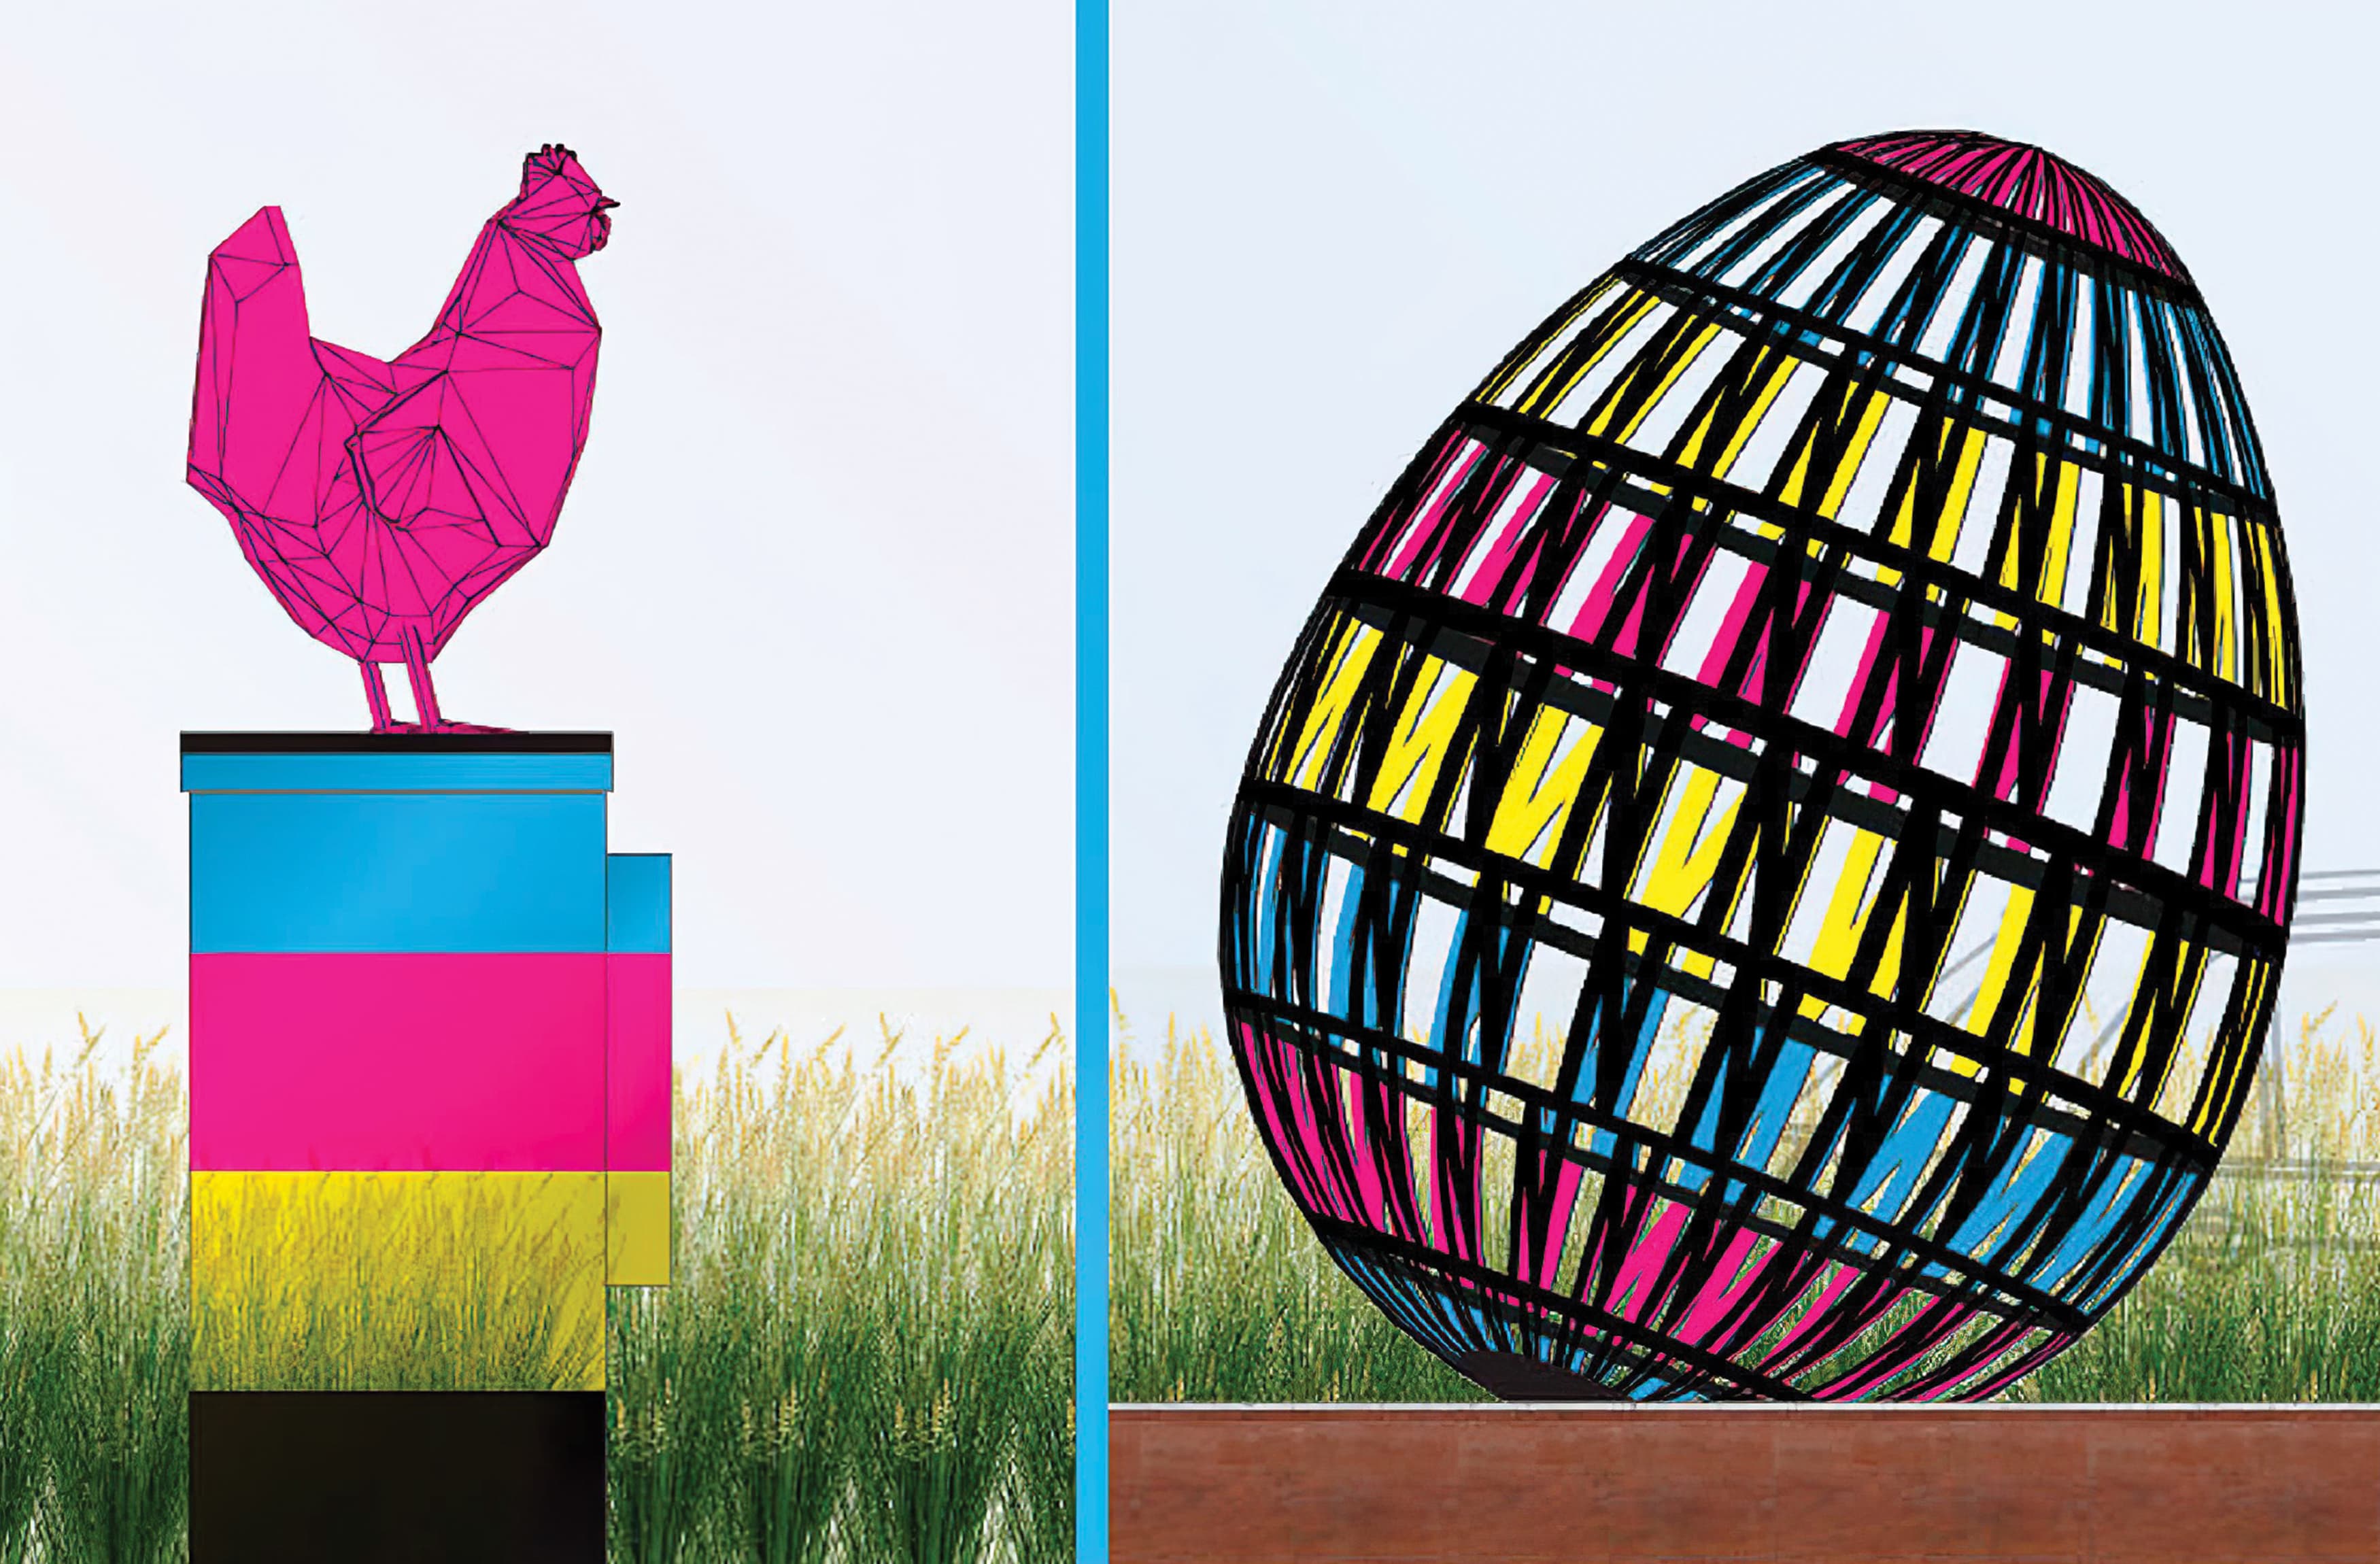 The Chicken and the Egg, a sculptural installation serving as a gateway for the NoMa neighborhood in Washington, D.C.